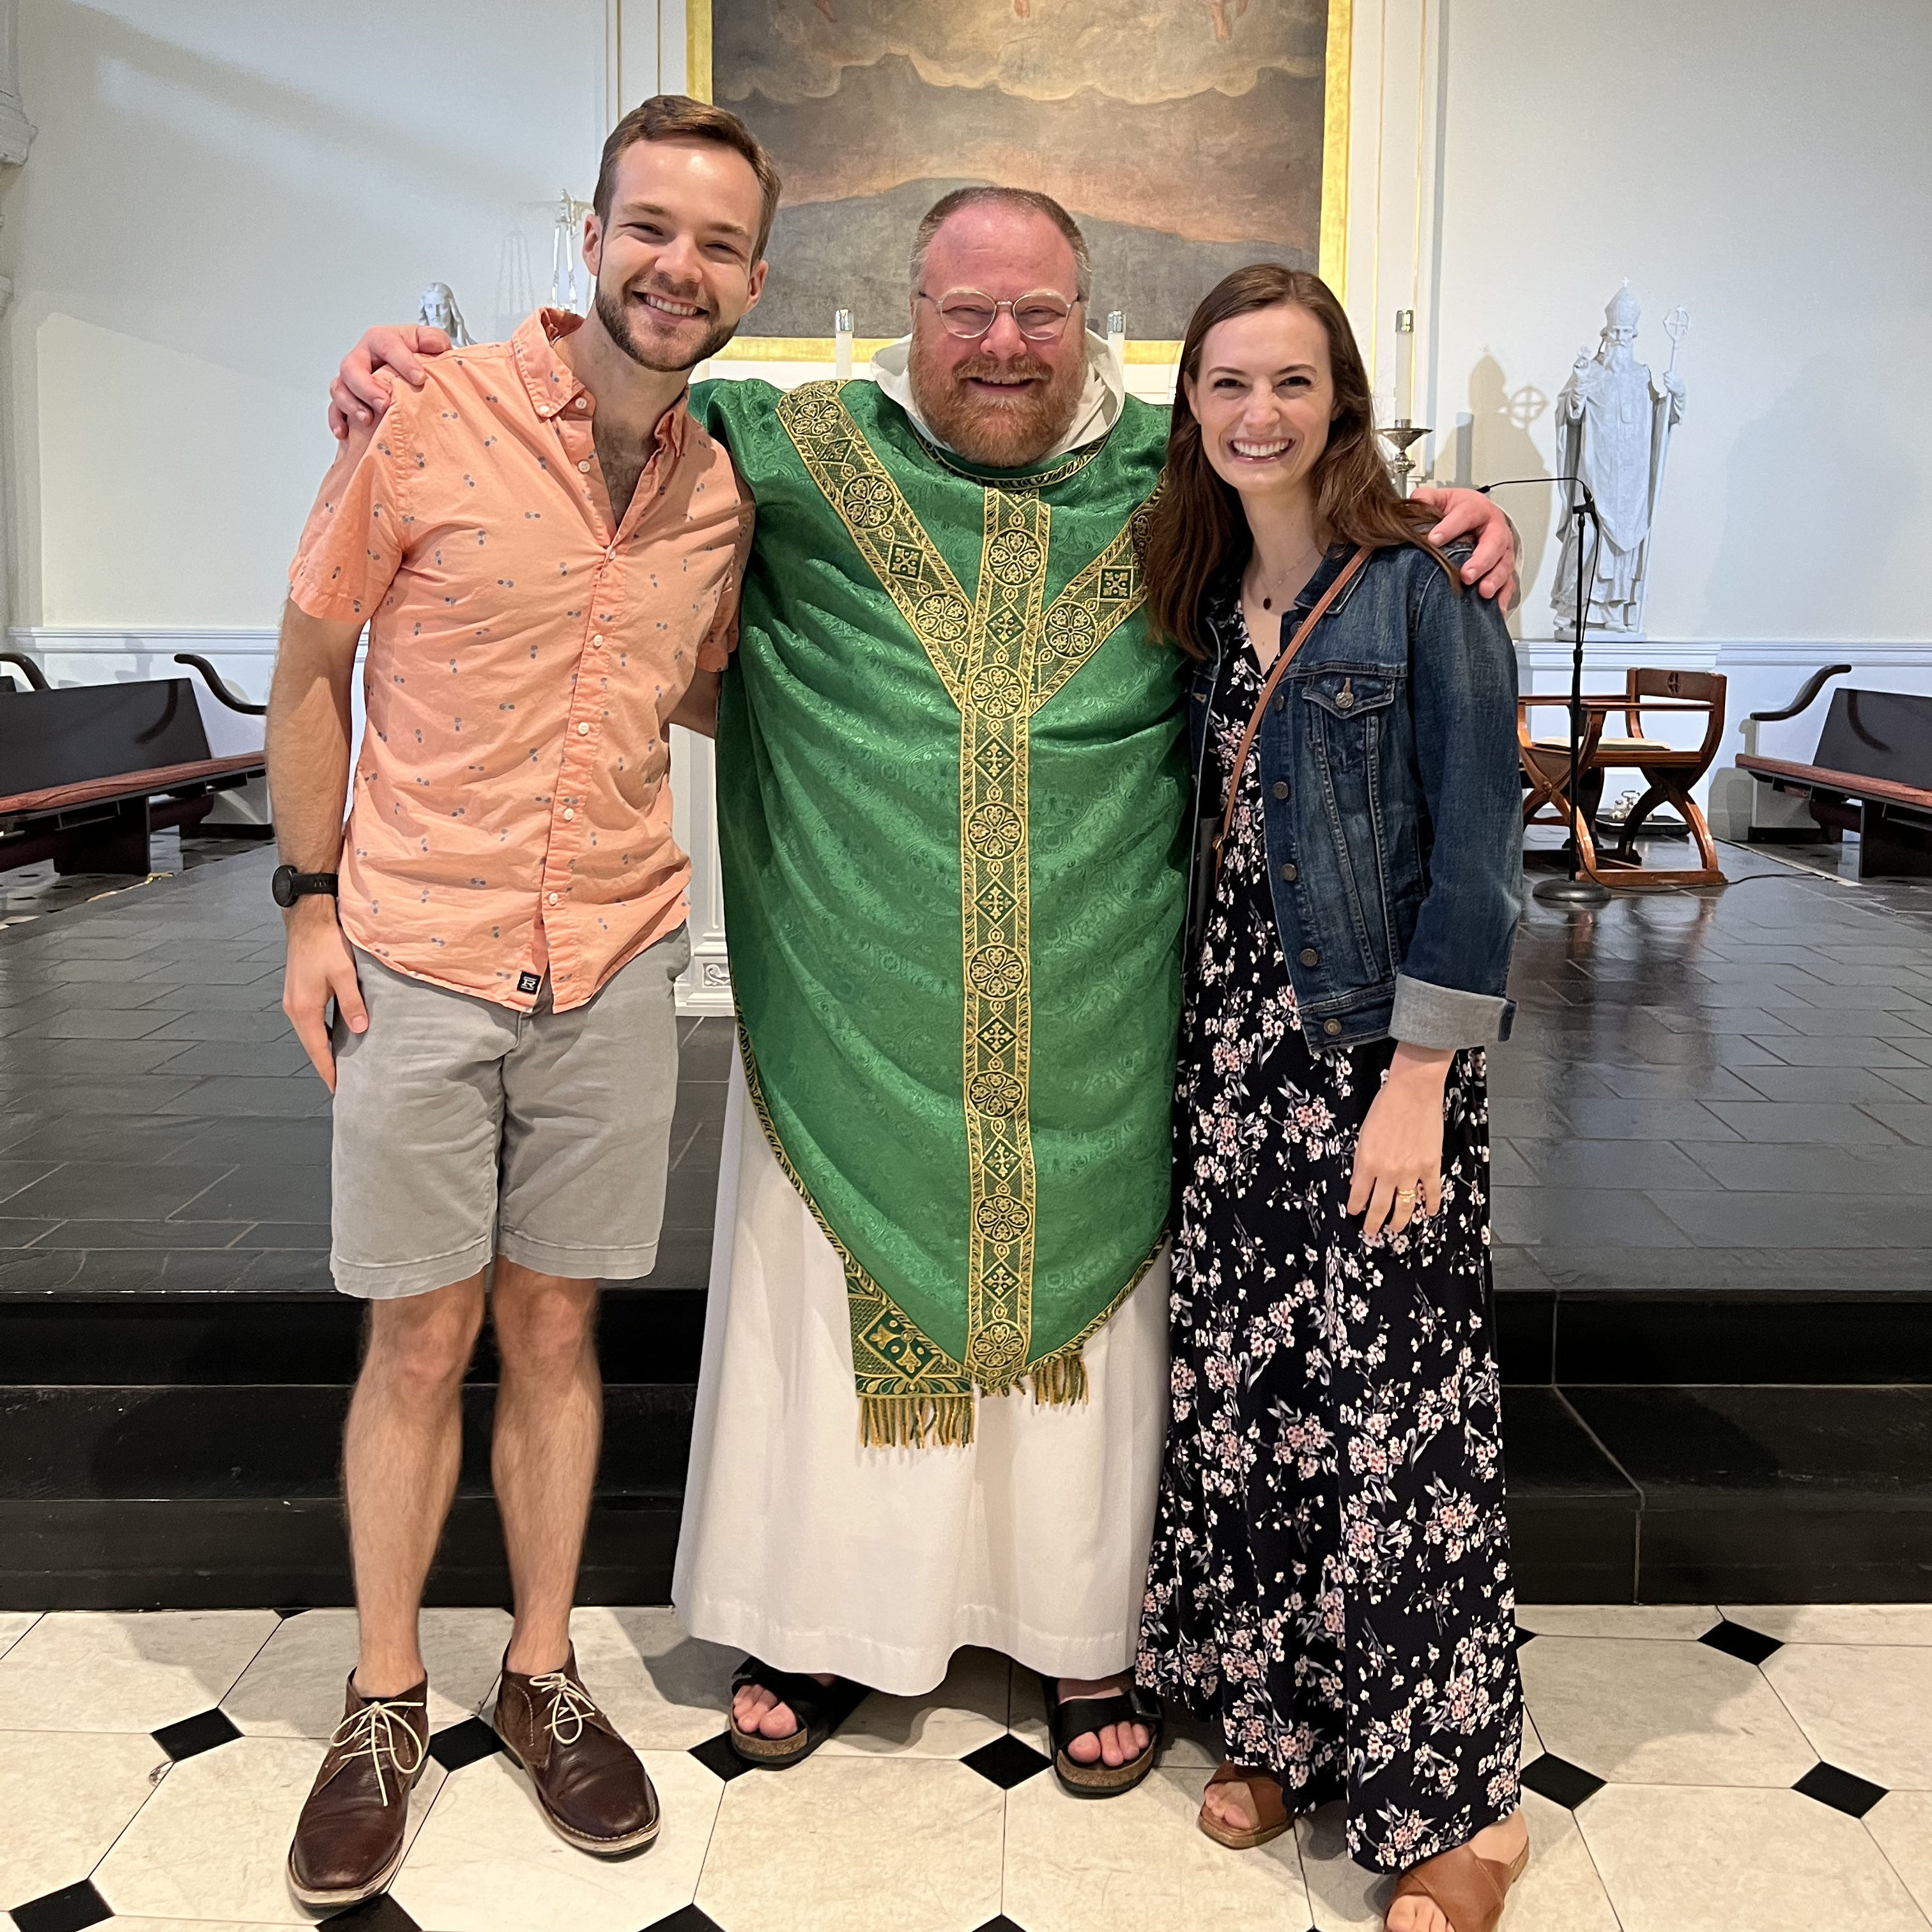 Our faith community is so important to us. Here we are with the priest who married us! We're thankful to call him a dear friend.